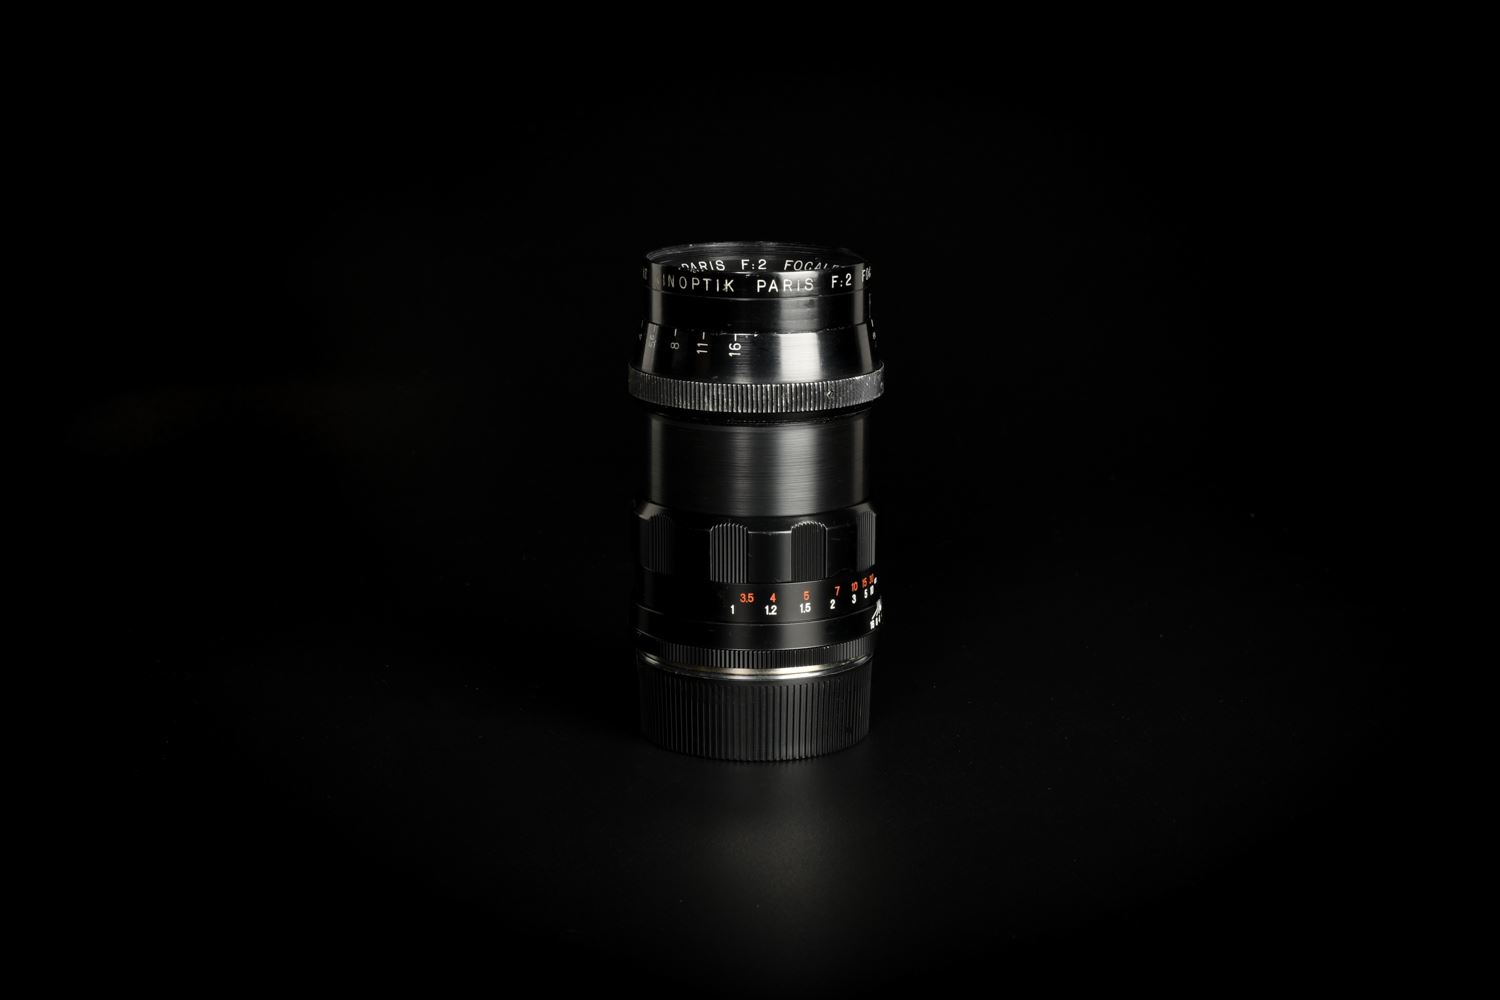 Picture of Kinoptik Apochromat Focale 75mm f/2 Modified To Leica M